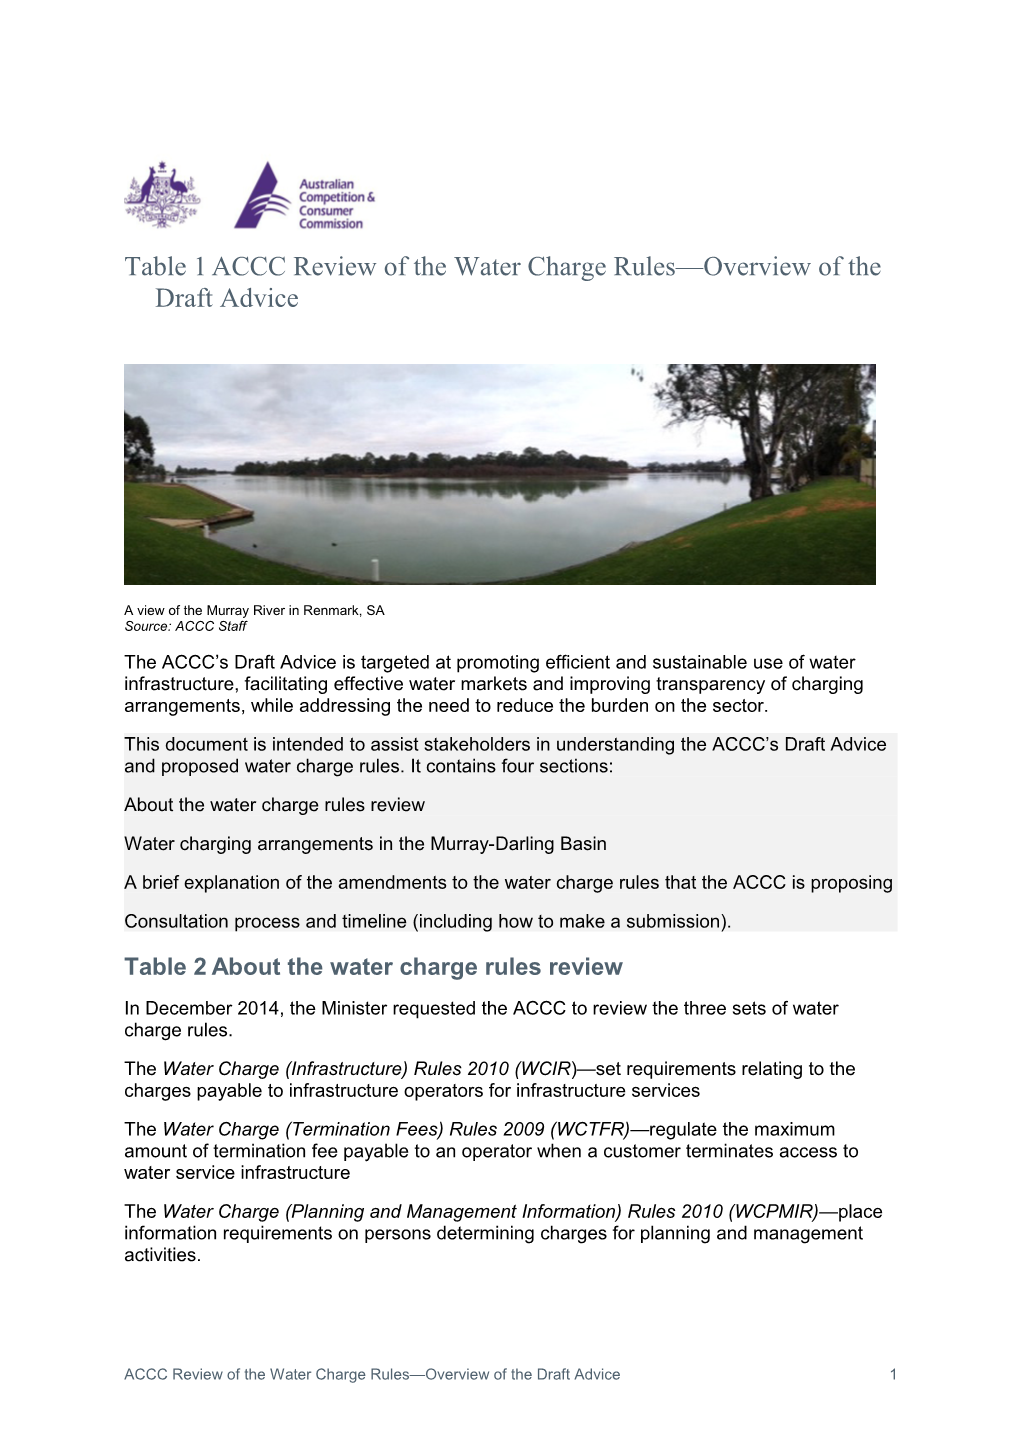 ACCC Review of the Water Charge Rules Overview of the Draft Advice